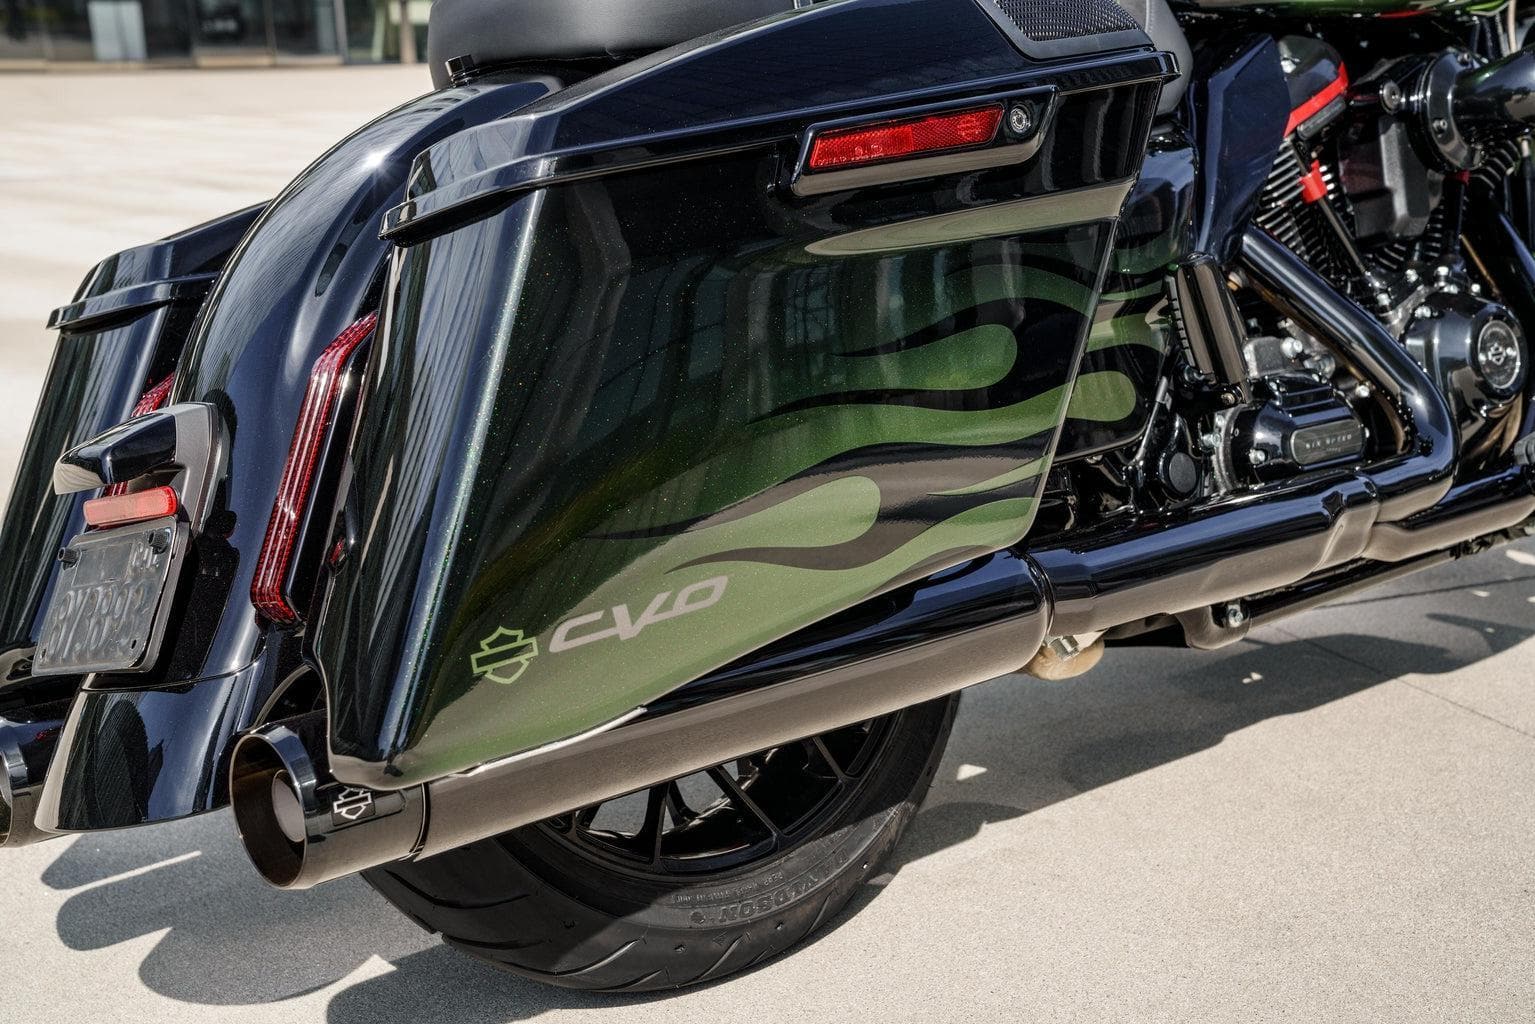 Harley Rolls Out All-New CVO Street Glide for 2023